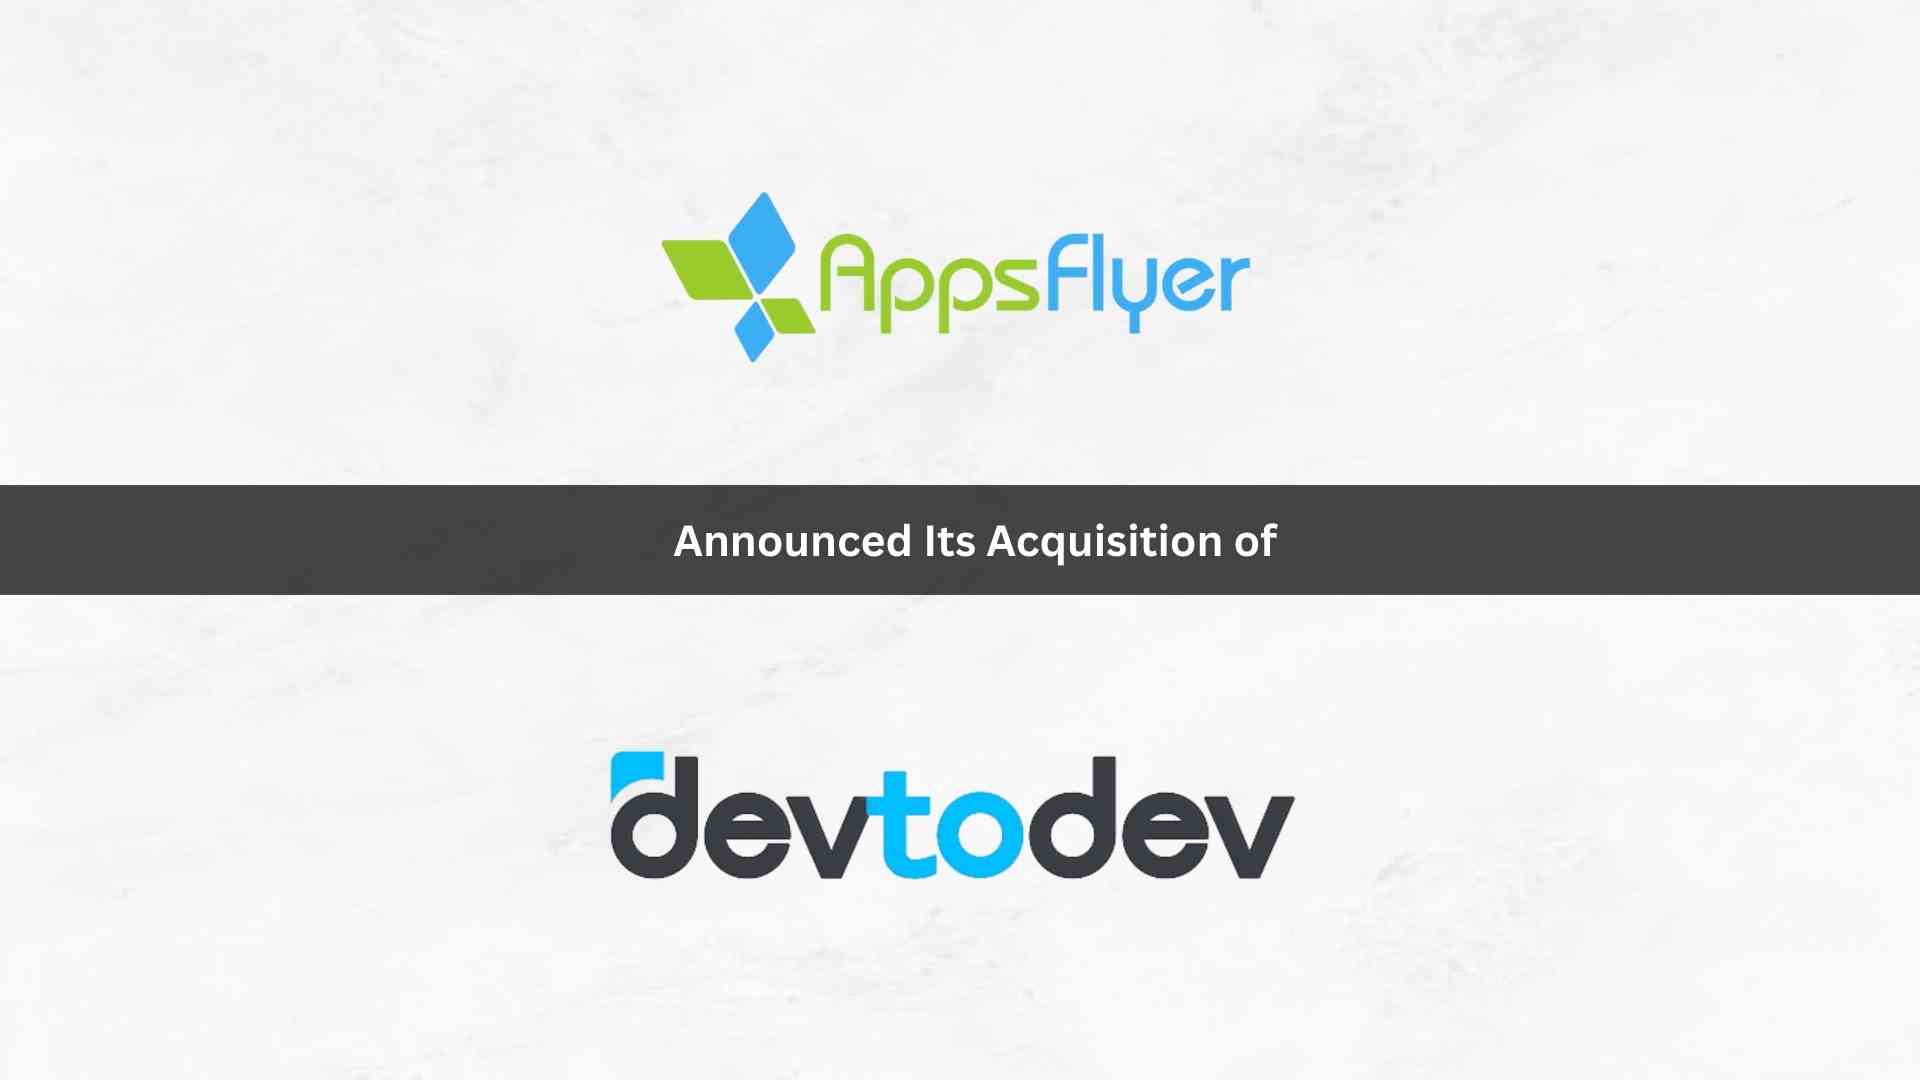 AppsFlyer Acquires Gaming and Apps Data Analytics Company devtodev to Expand the Premier Growth Platform for Marketing Teams